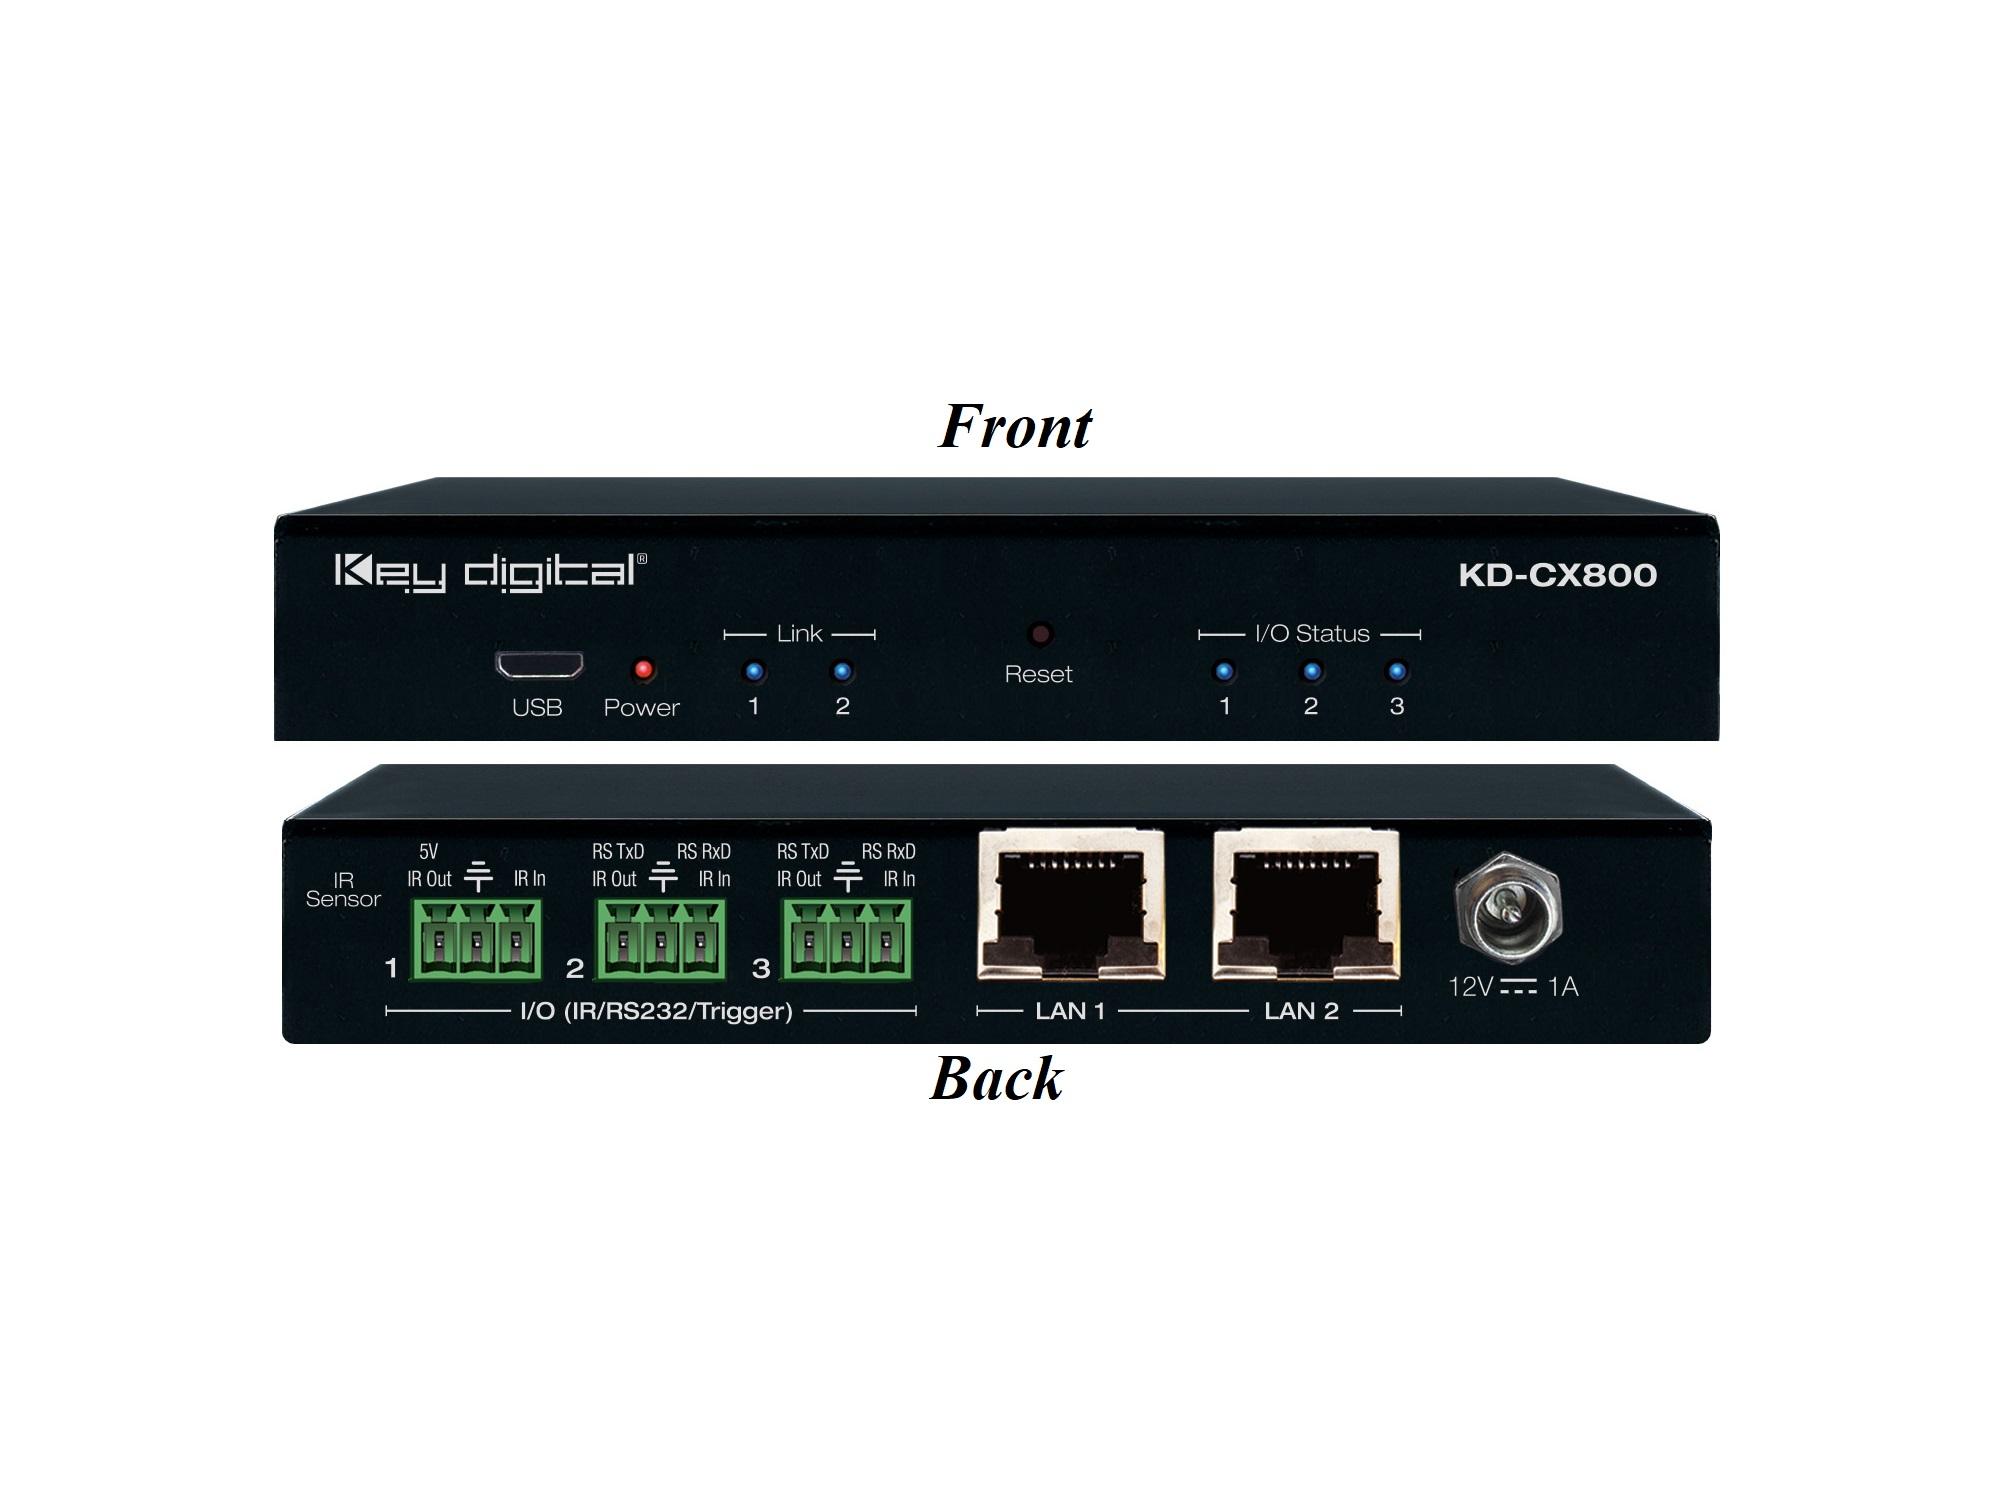 Key Digital KD-CX800 Control Interface with IR and RS-232 over IP Routing